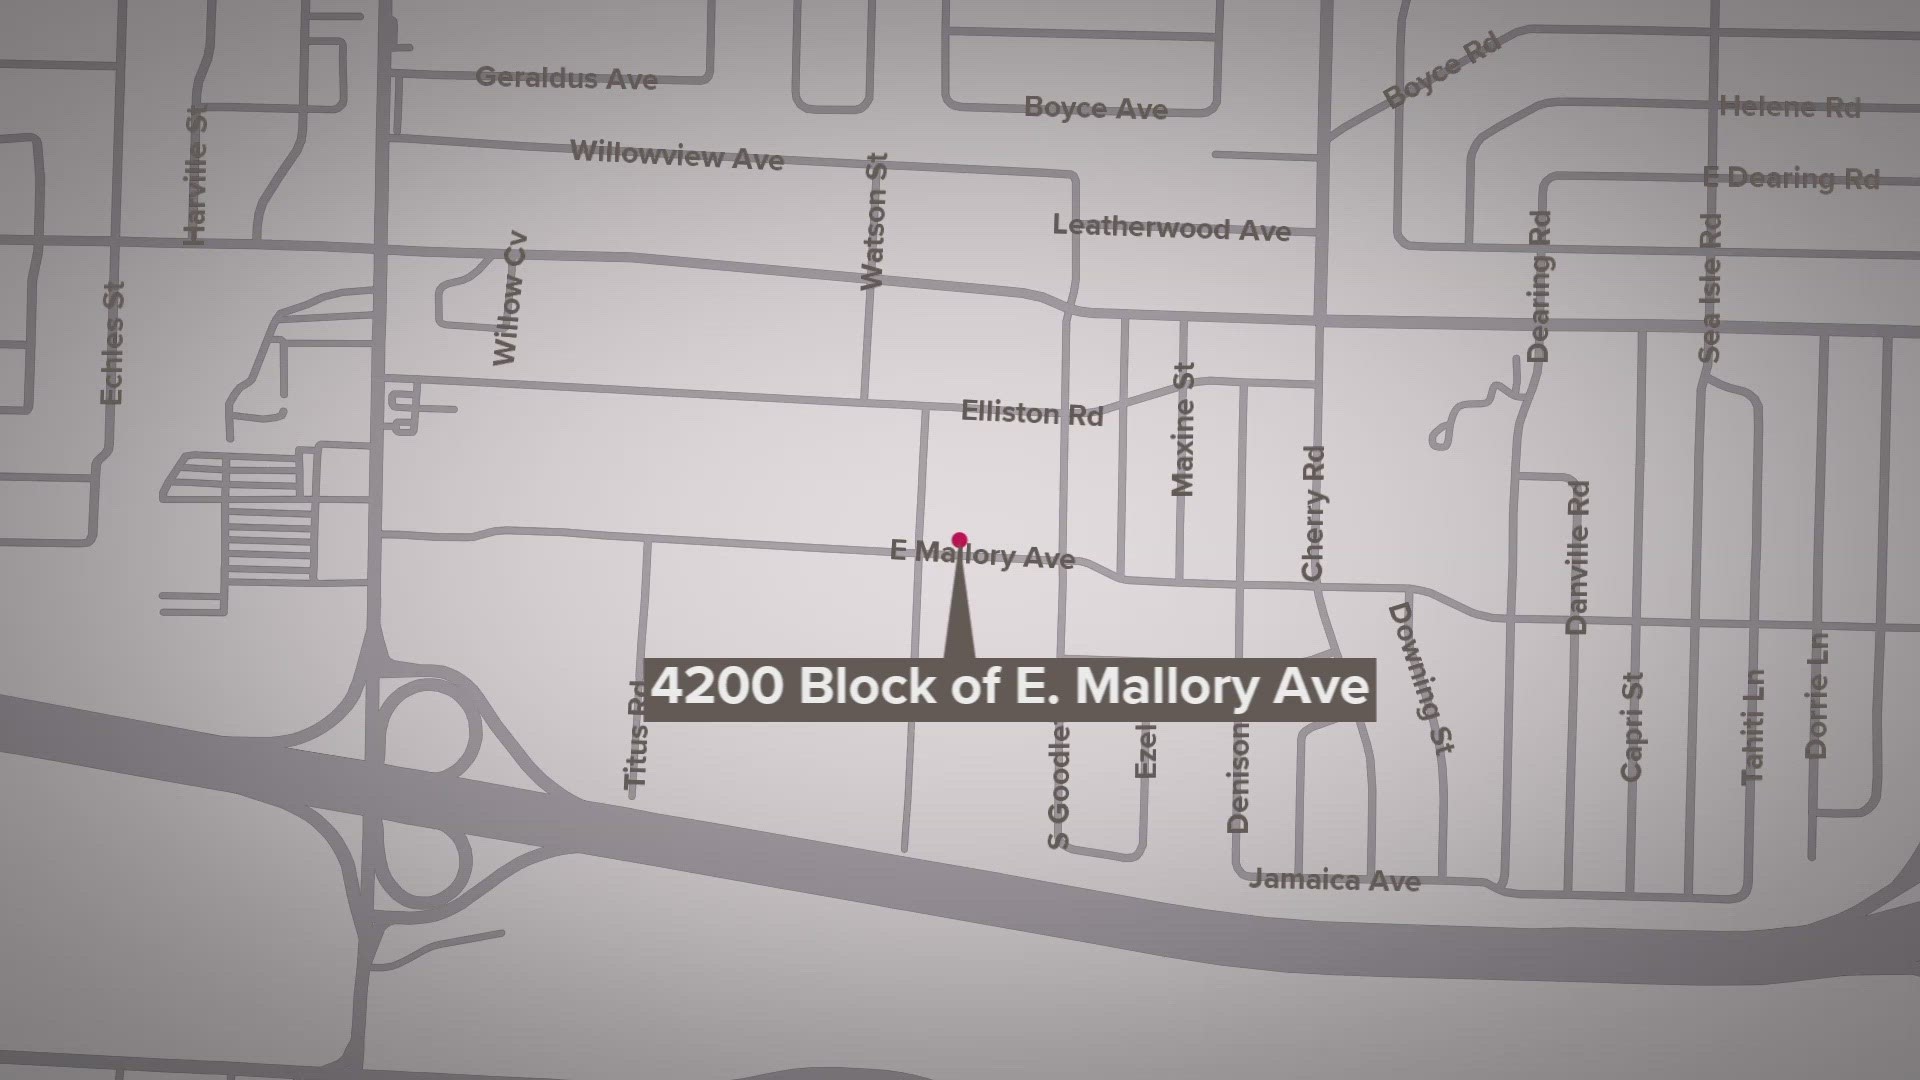 A deadly shooting took place in the 4200 block of East Mallory Avenue on Saturday morning, according to MPD.